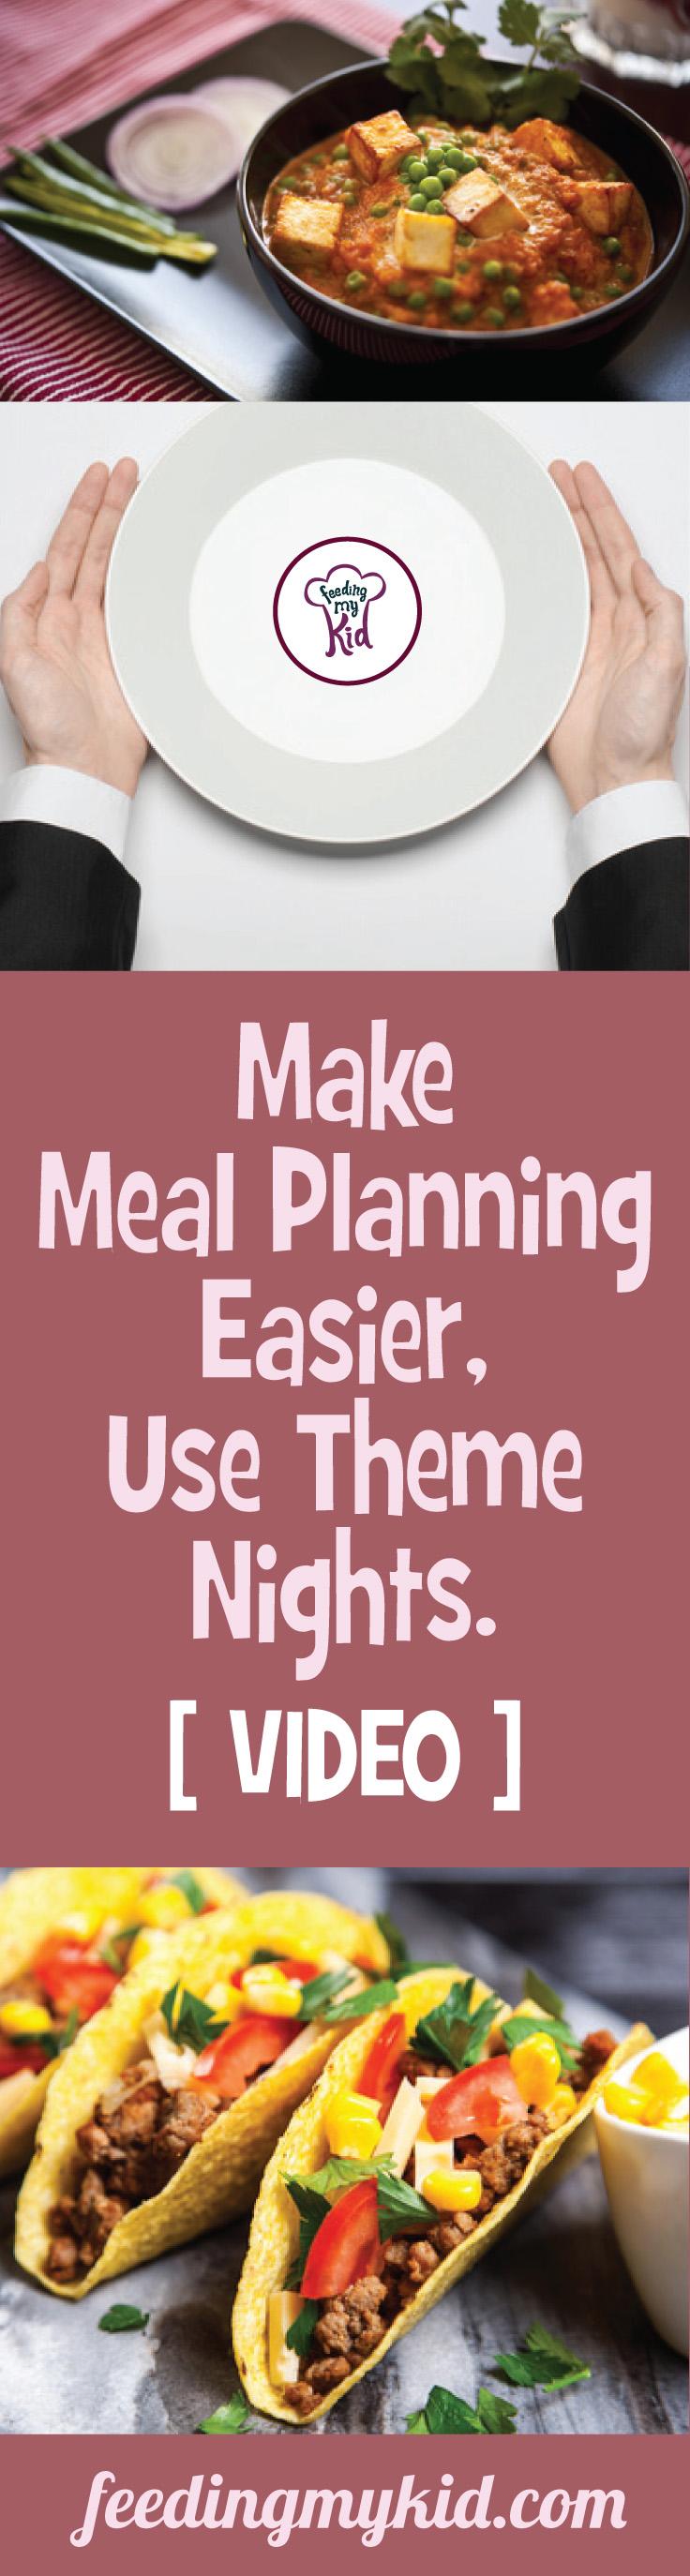 Make Meal Planning Easier​, ​Use Theme Nights